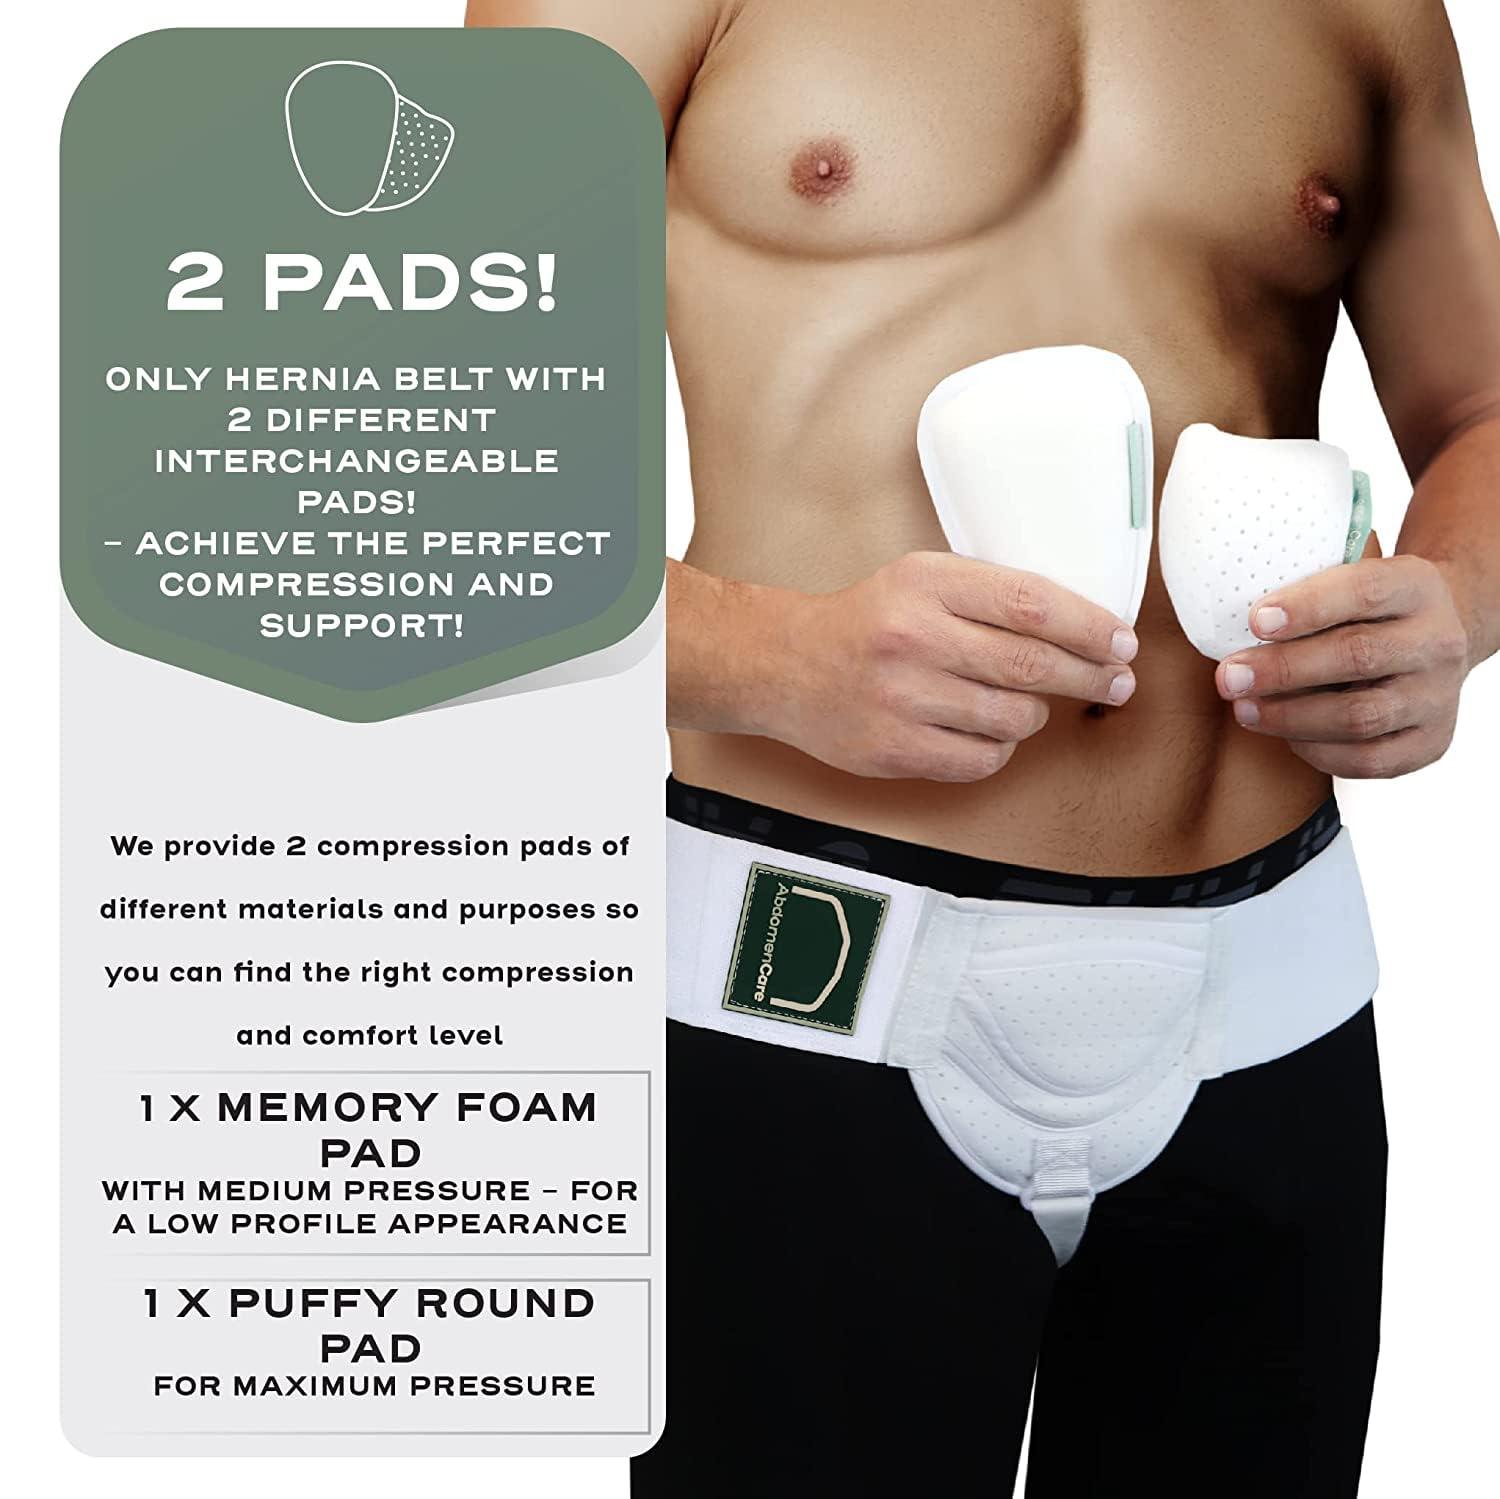 Women's Hernia Underwear with Left and Right pads included